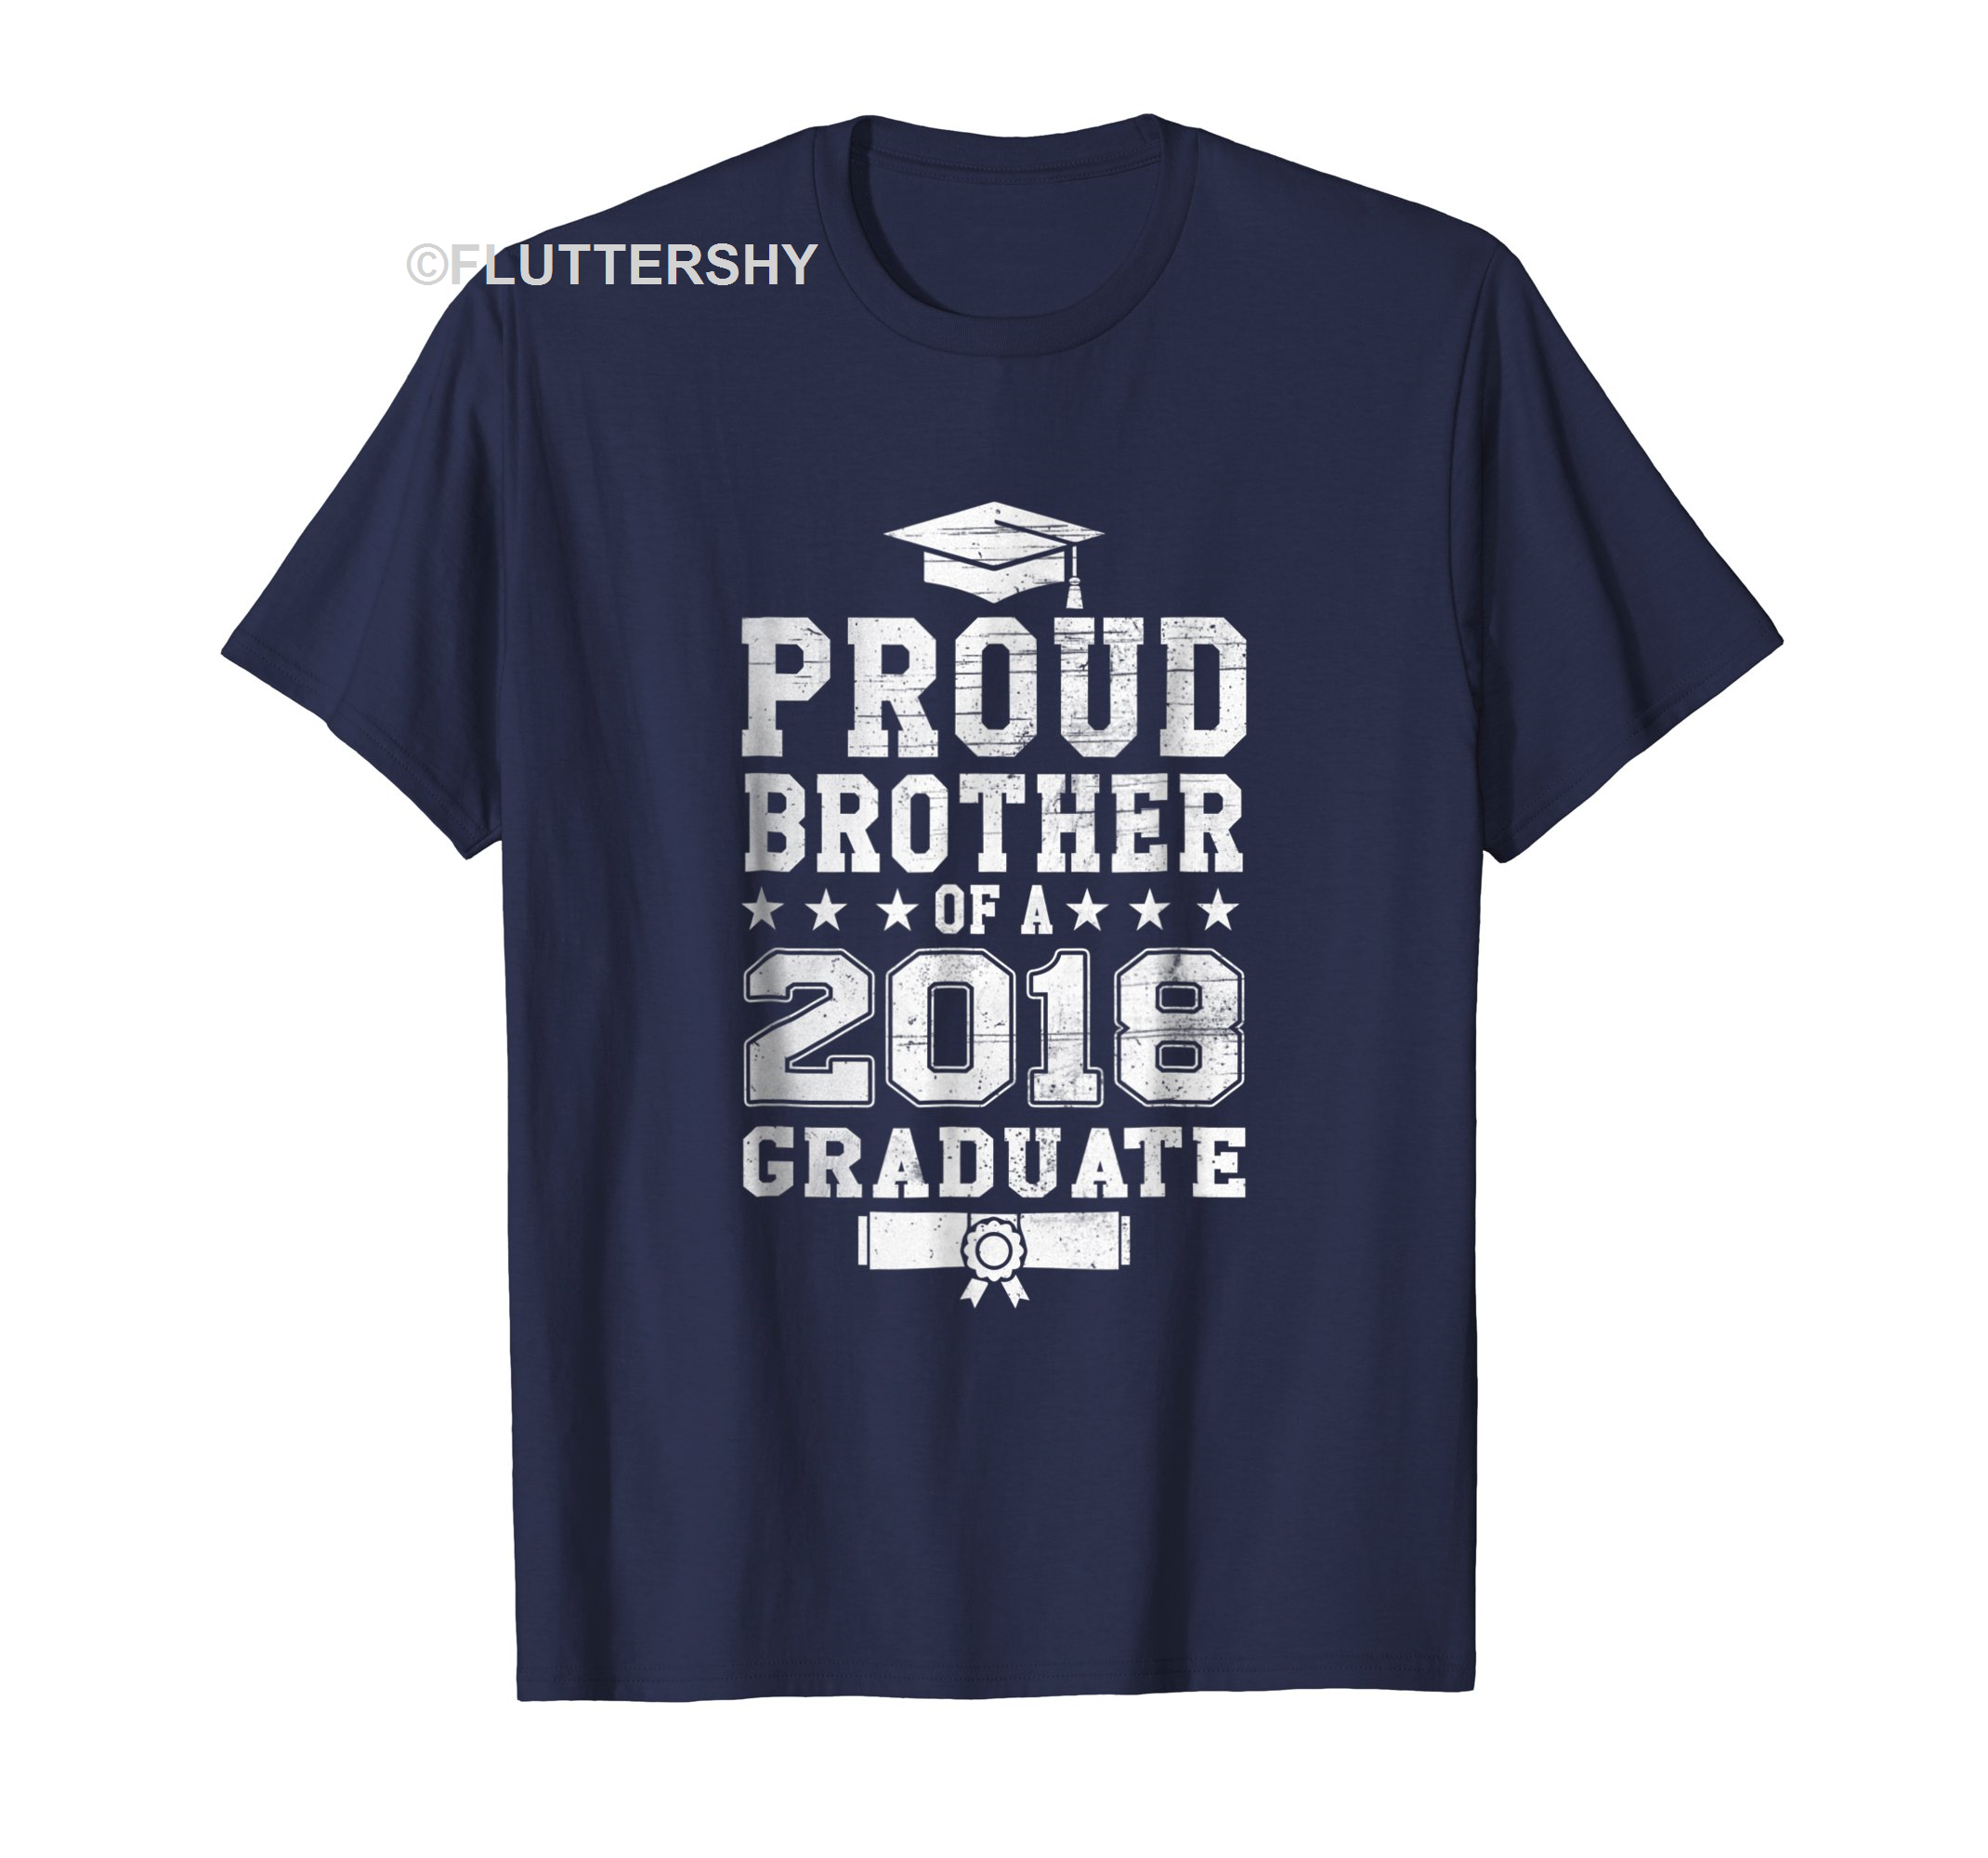 Outstanding Cover Your Body With Amazing Proud Brother Of A 2018 Graduate Graduating Tshirt